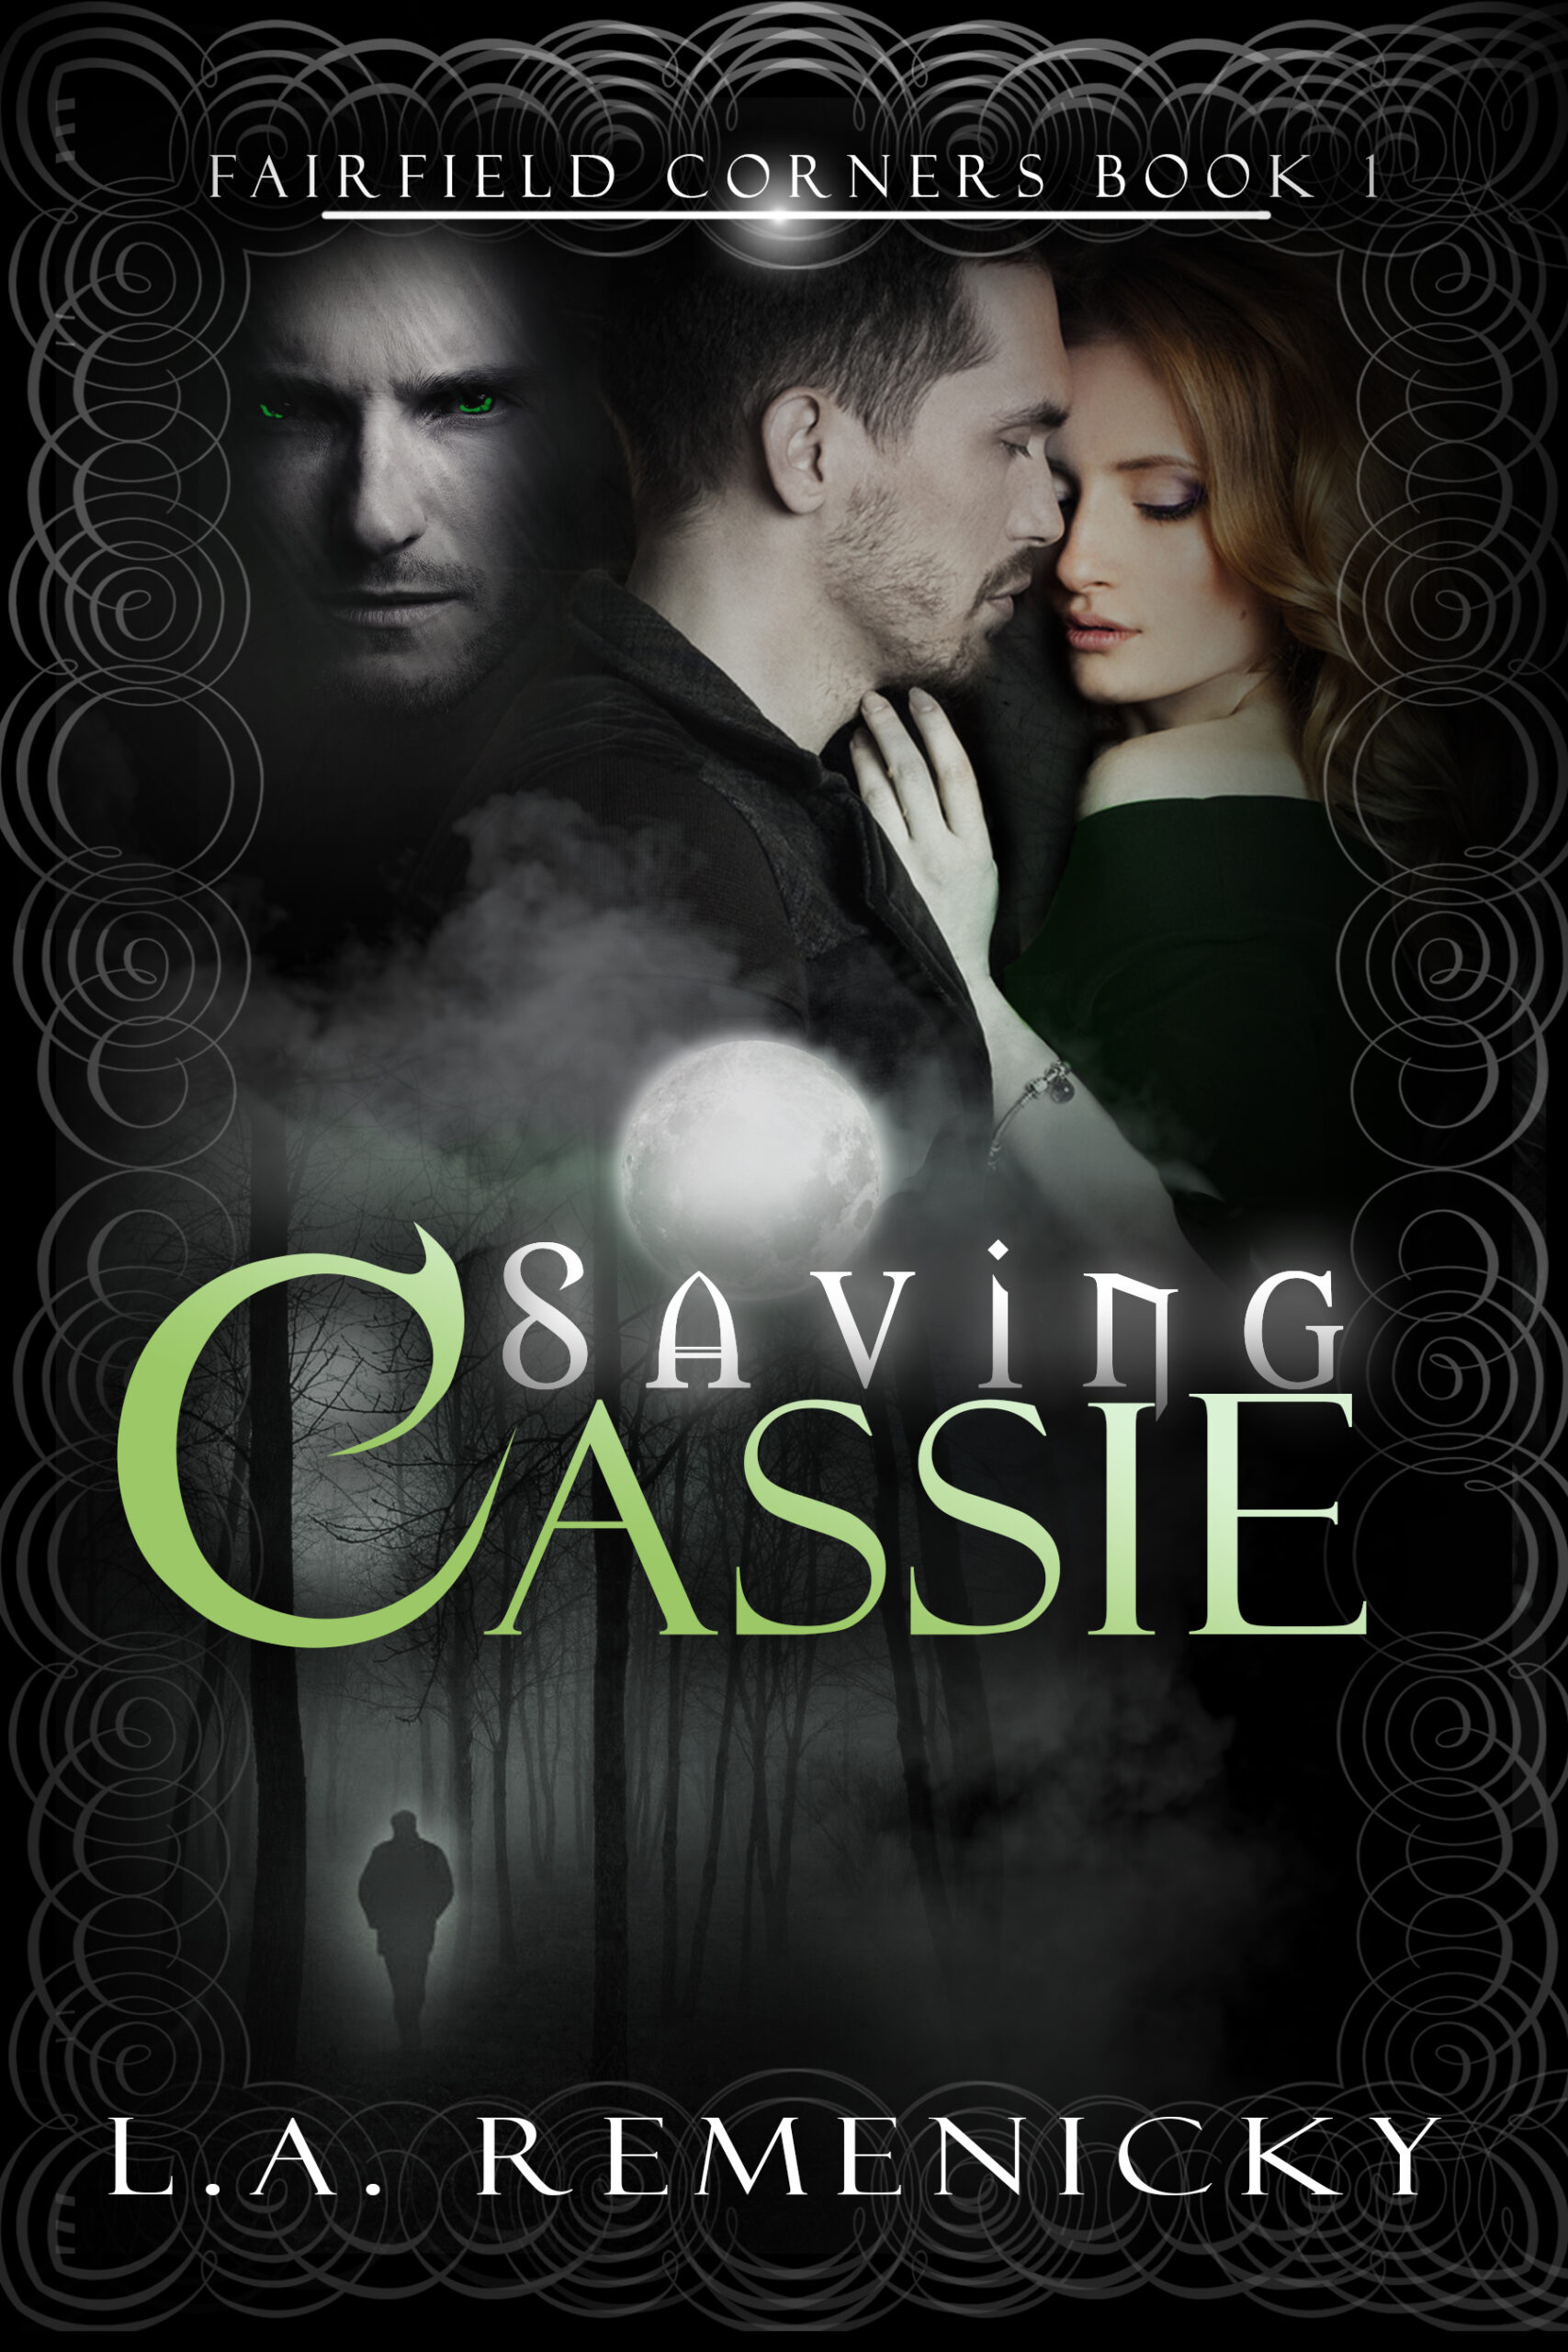 FREE: Saving Cassie, Fairfield Corners Book 1 by L.A. Remenicky